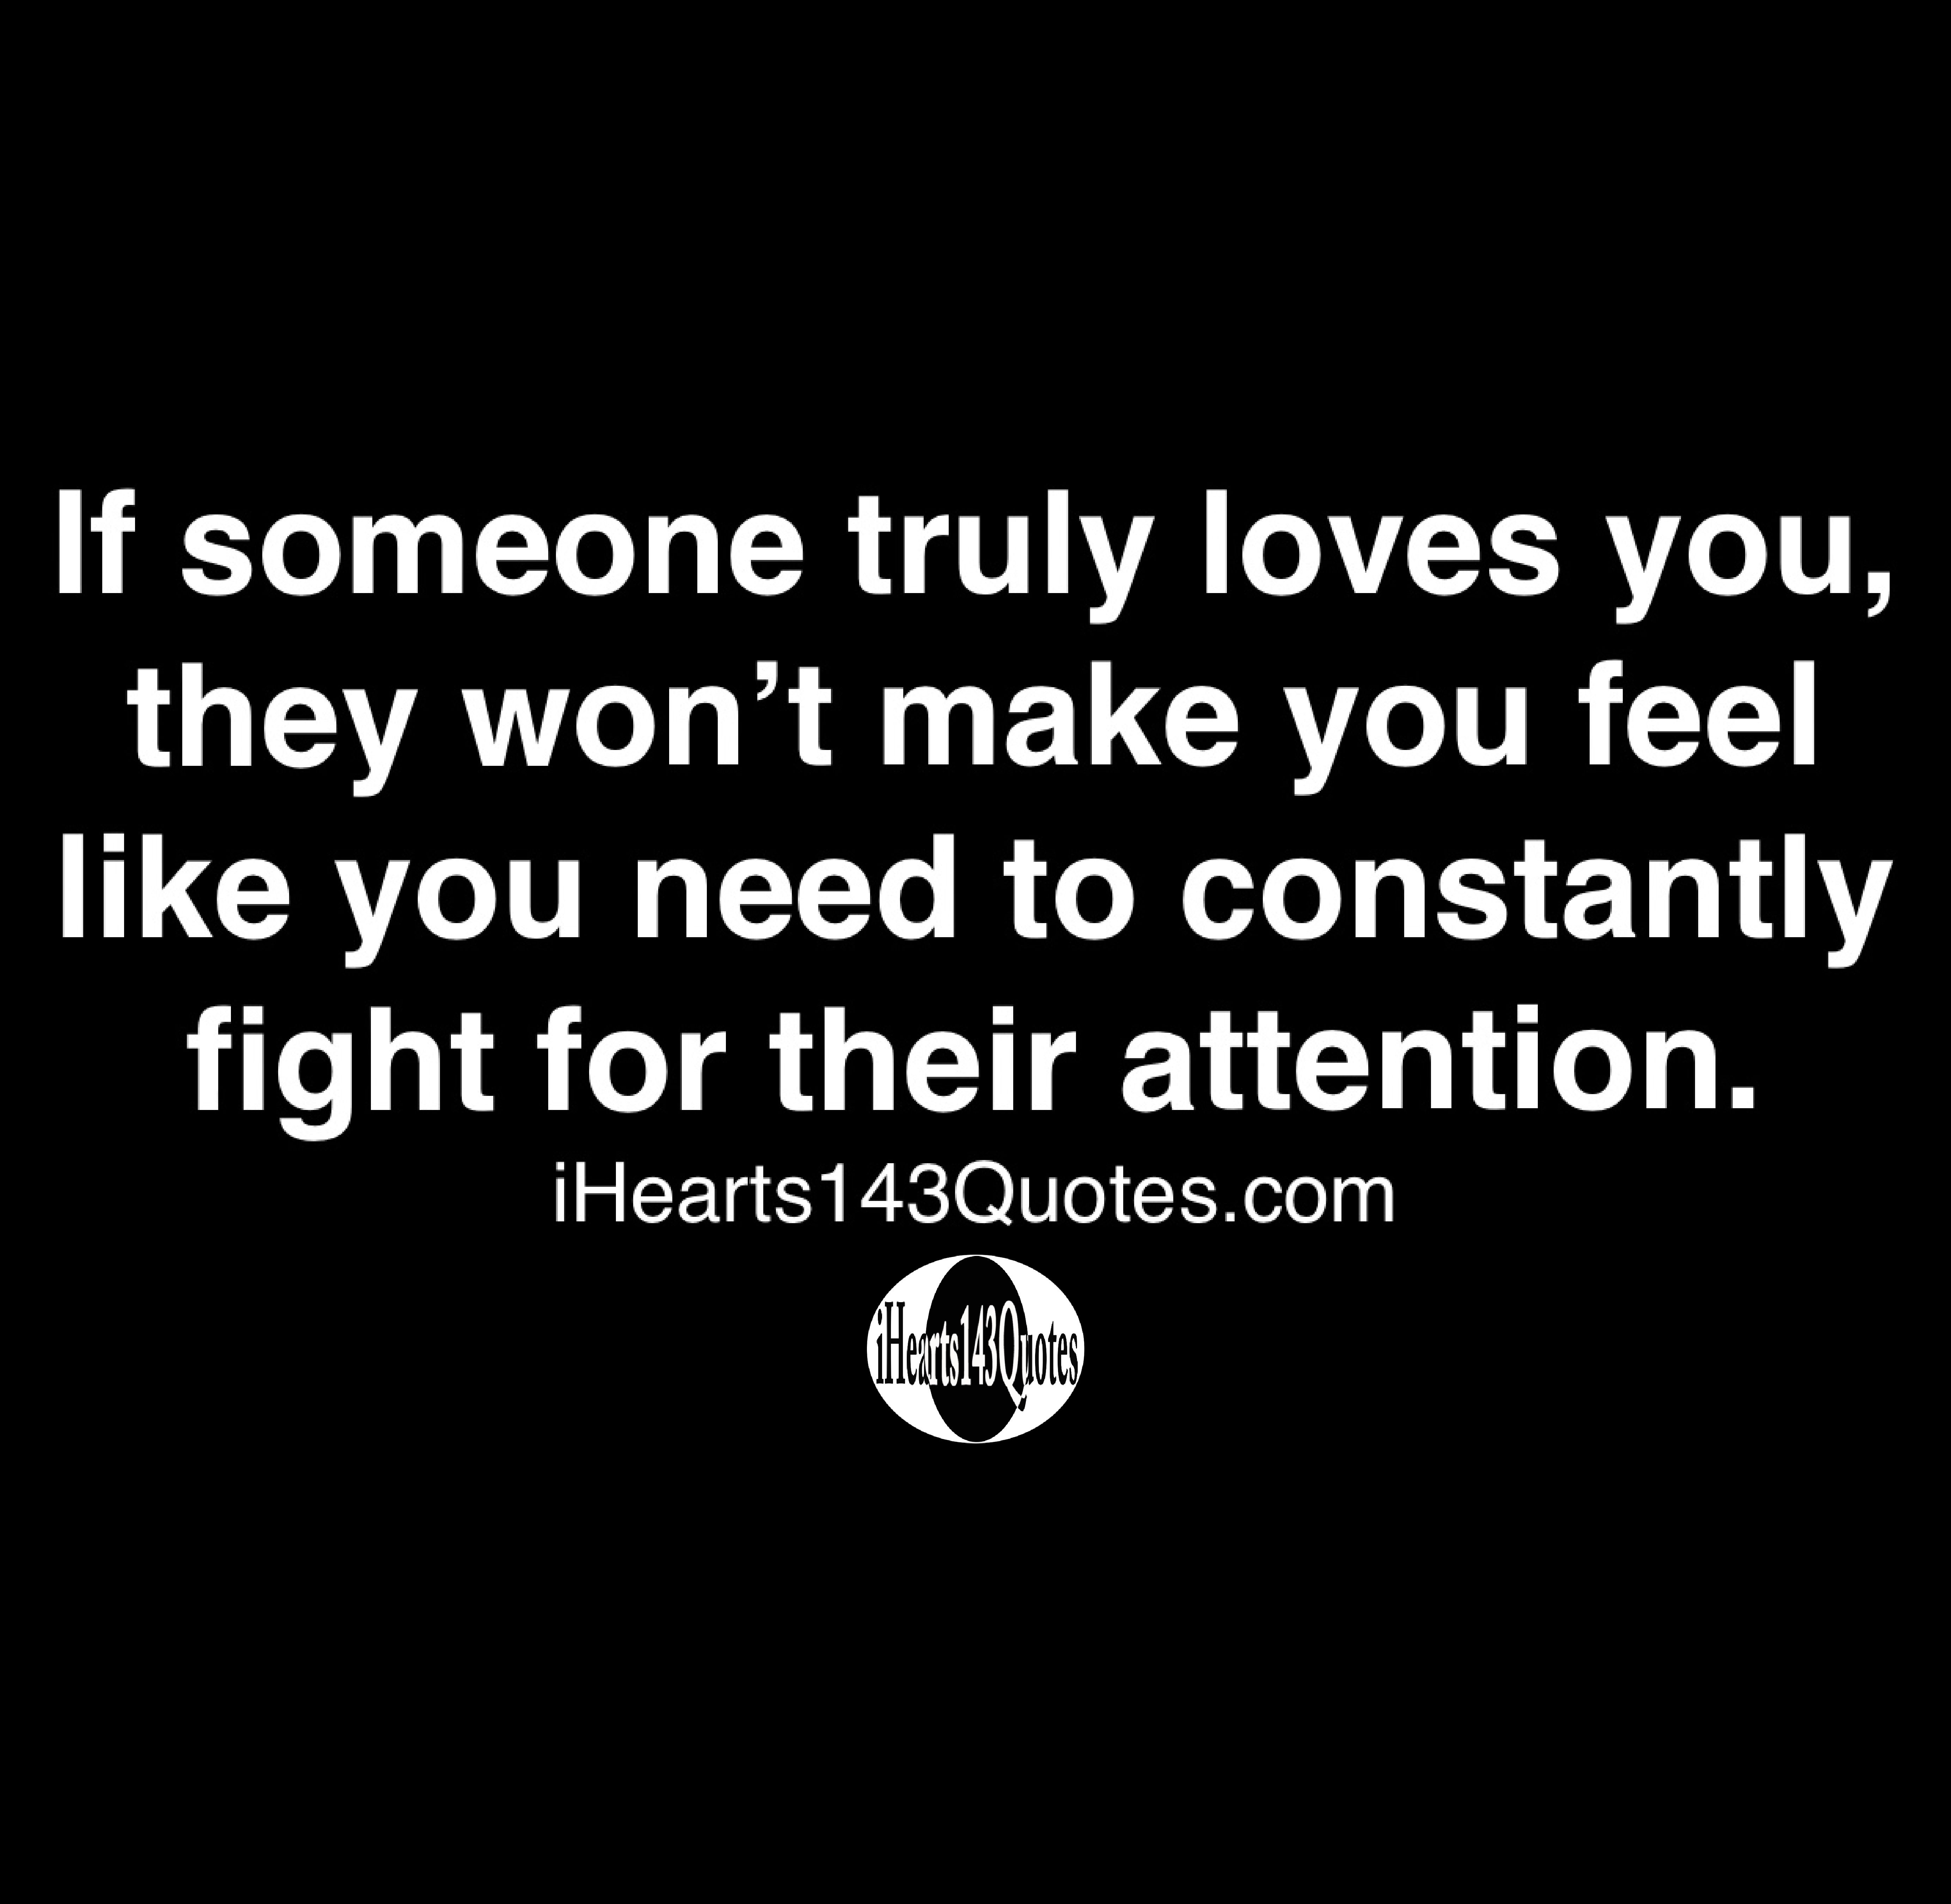 If Someone Truly Loves You They Won T Make You Feel Like You Need To Constantly Fight For Their Attention Quotes Ihearts143quotes